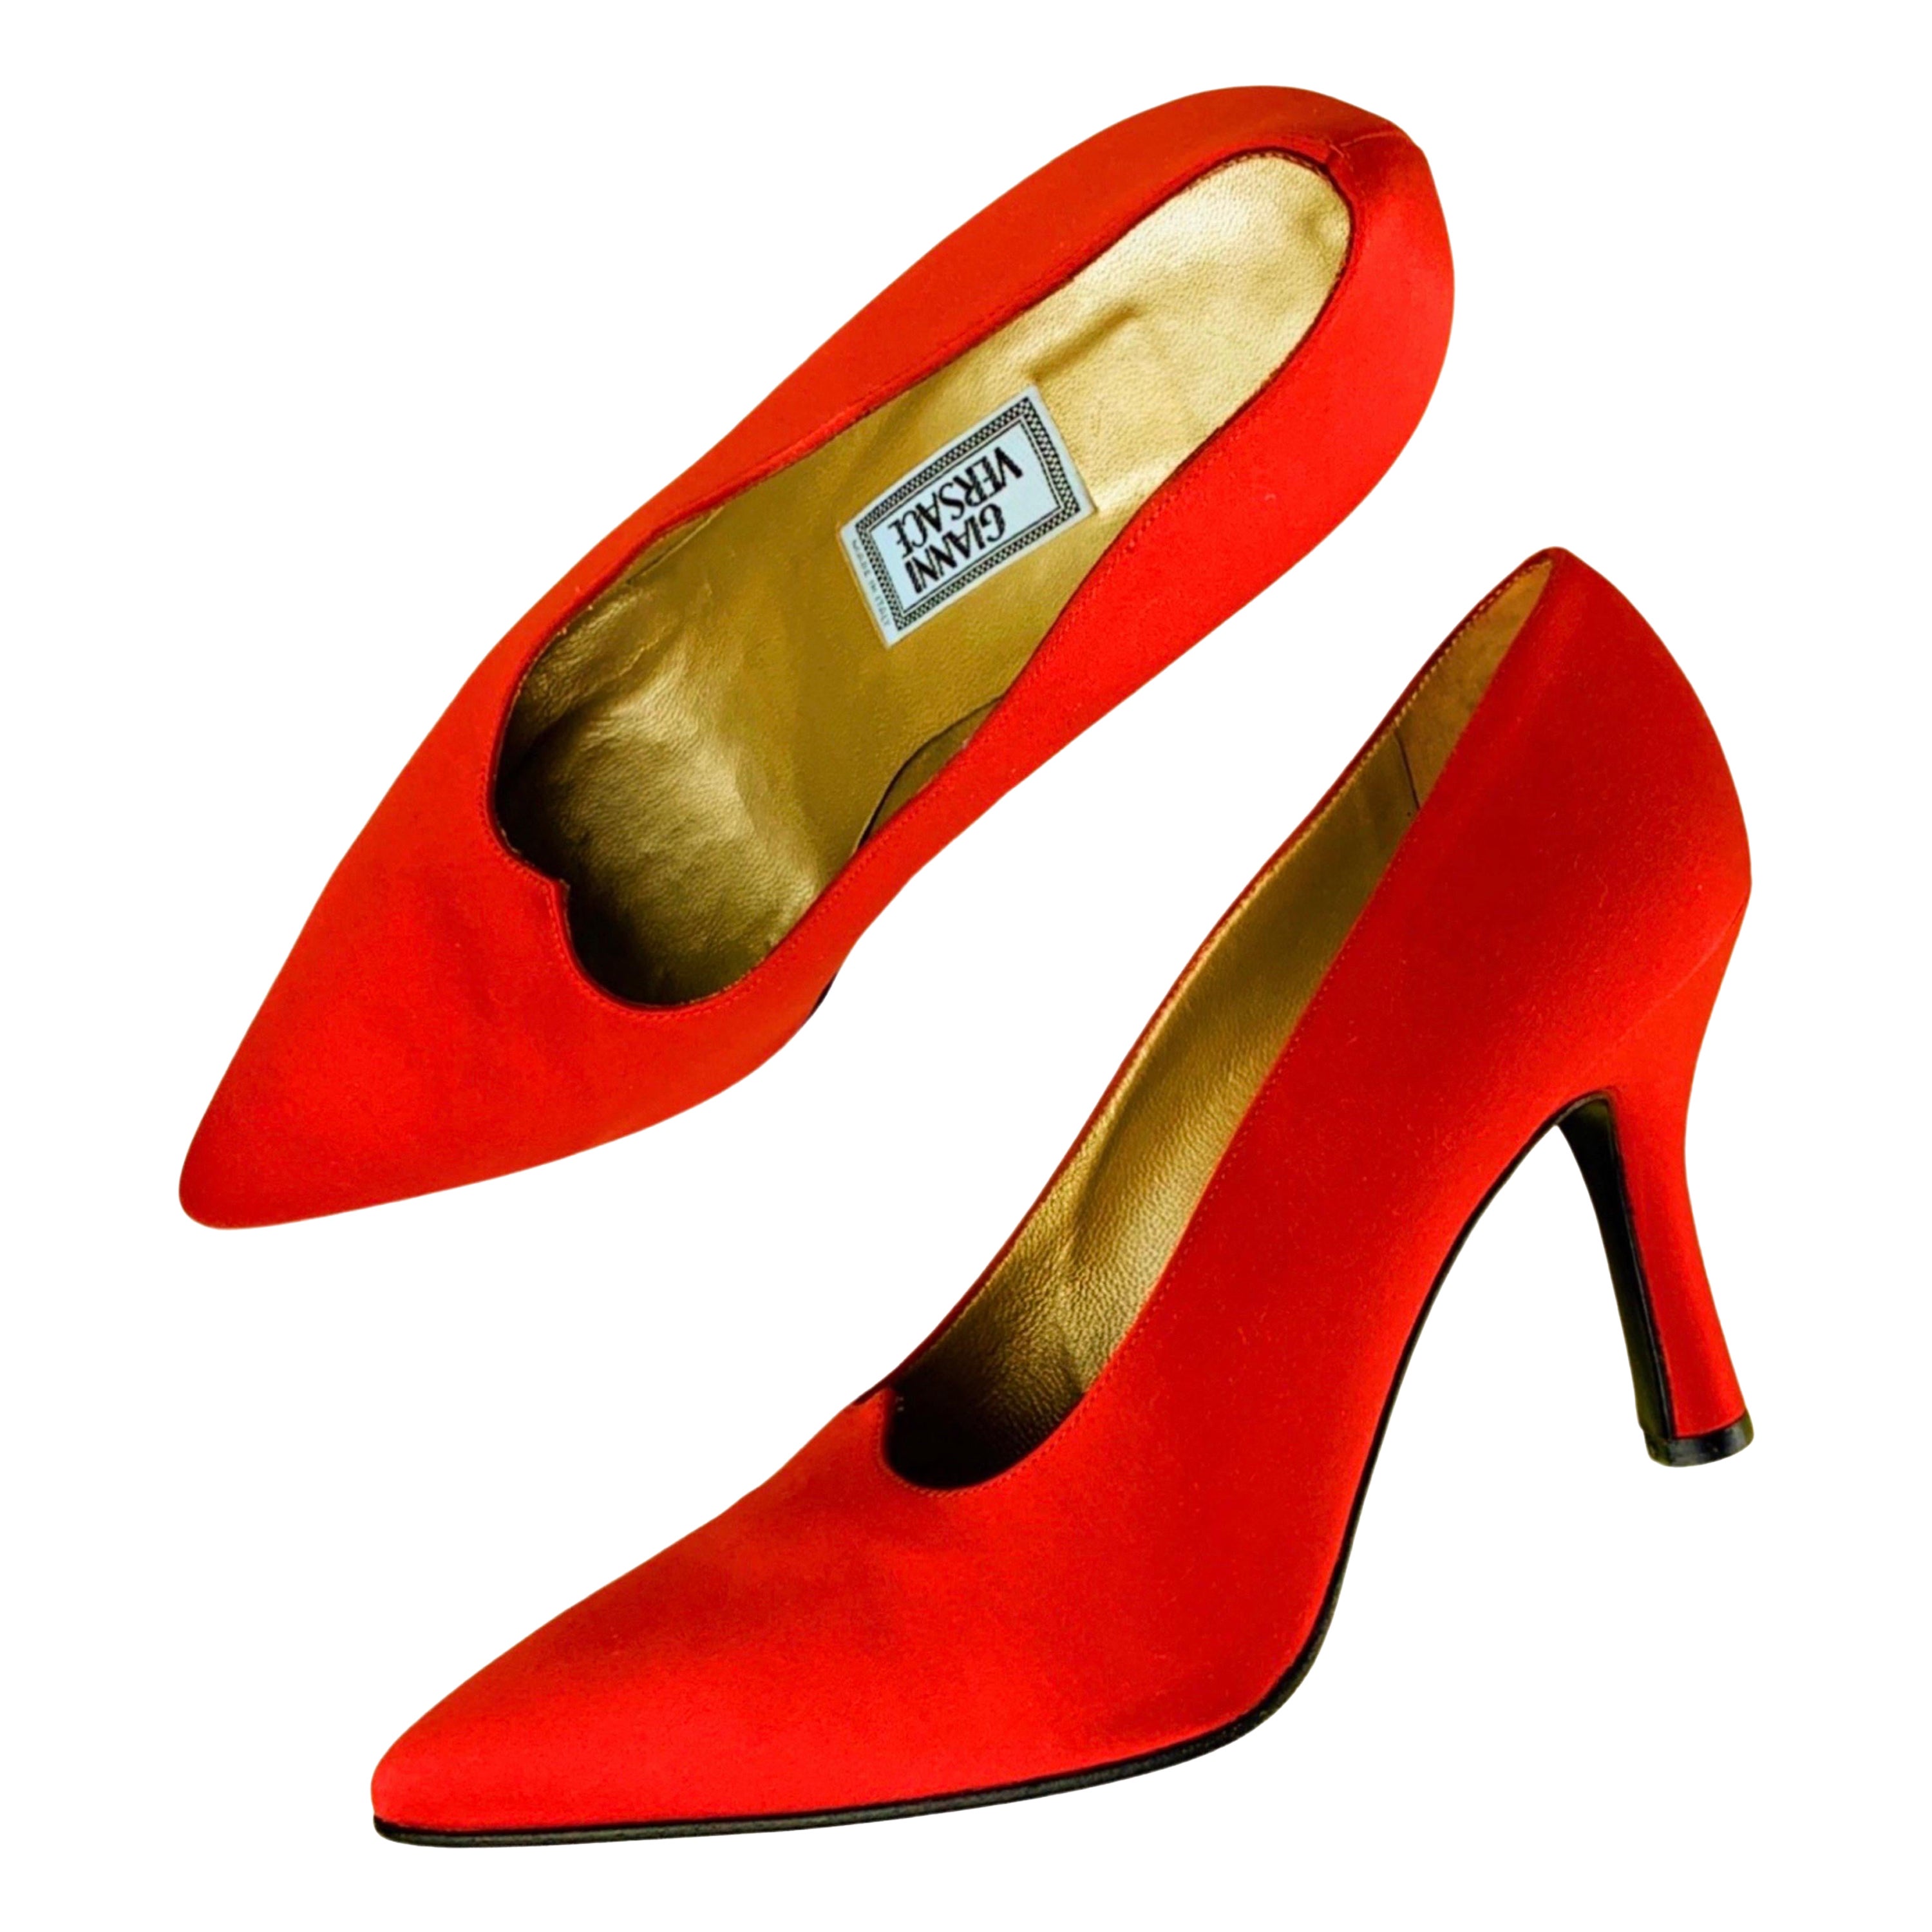 SS 1995 Gianni Versace Sweetheart Pumps For Sale